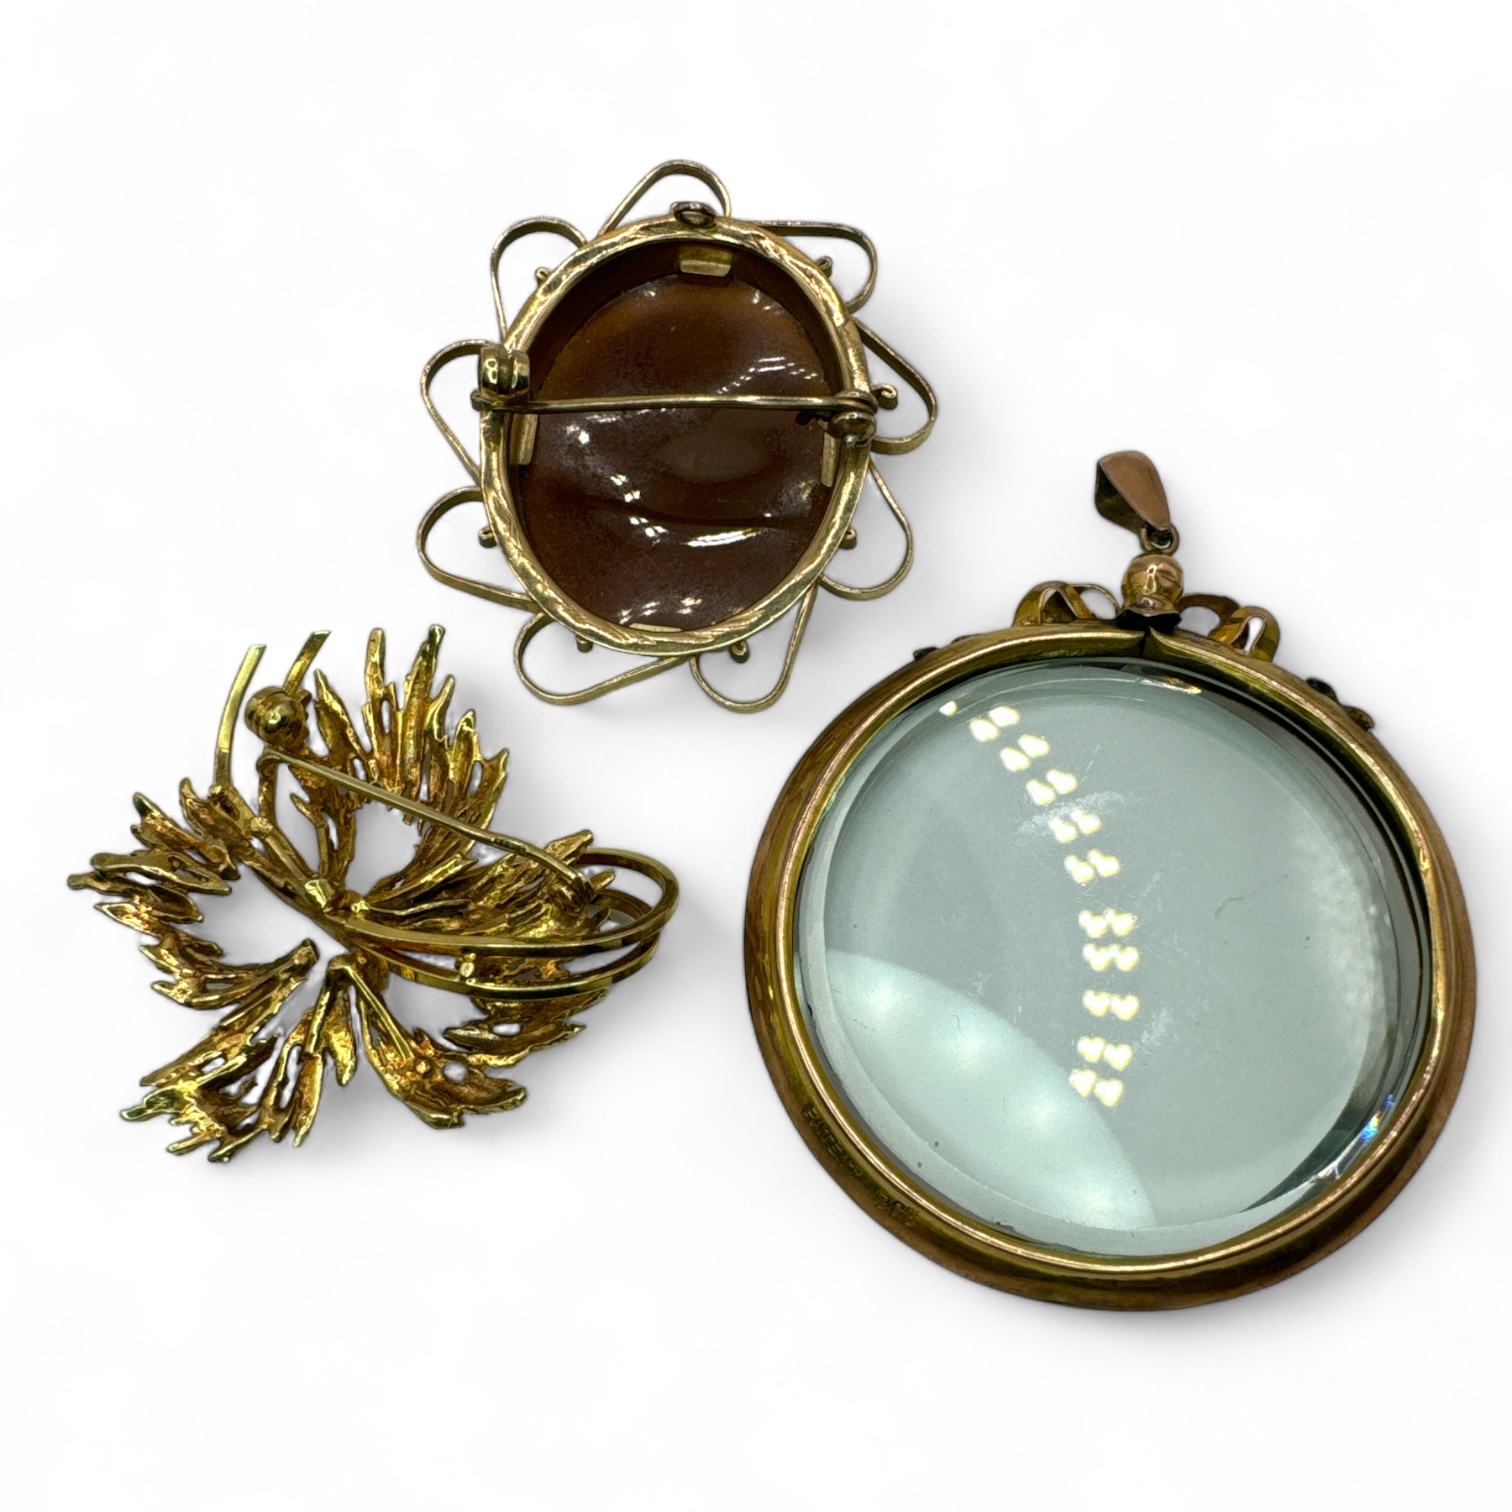 A 9ct yellow gold cameo brooch, depicting the three graces, along with a "9ct" stamped open locket - Image 2 of 2